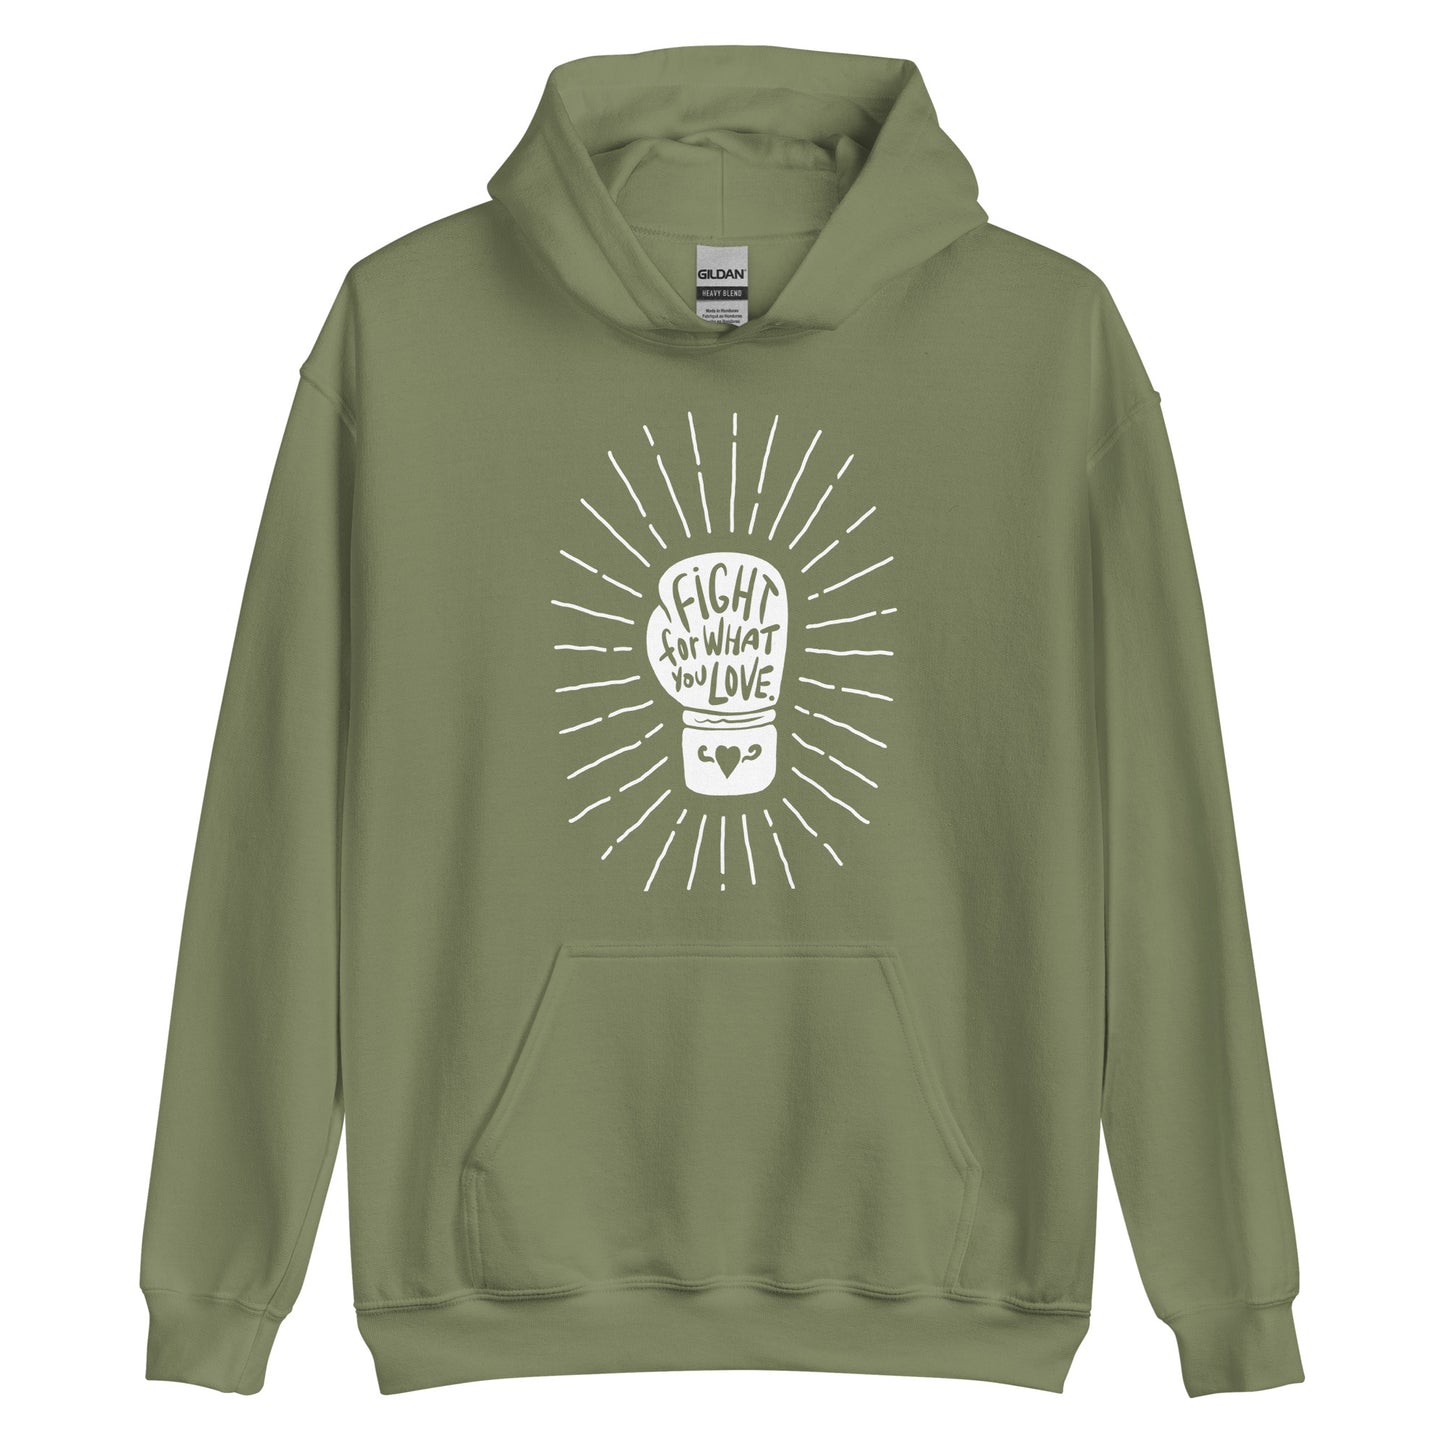 Fight For What You Love - Hooded Sweatshirt